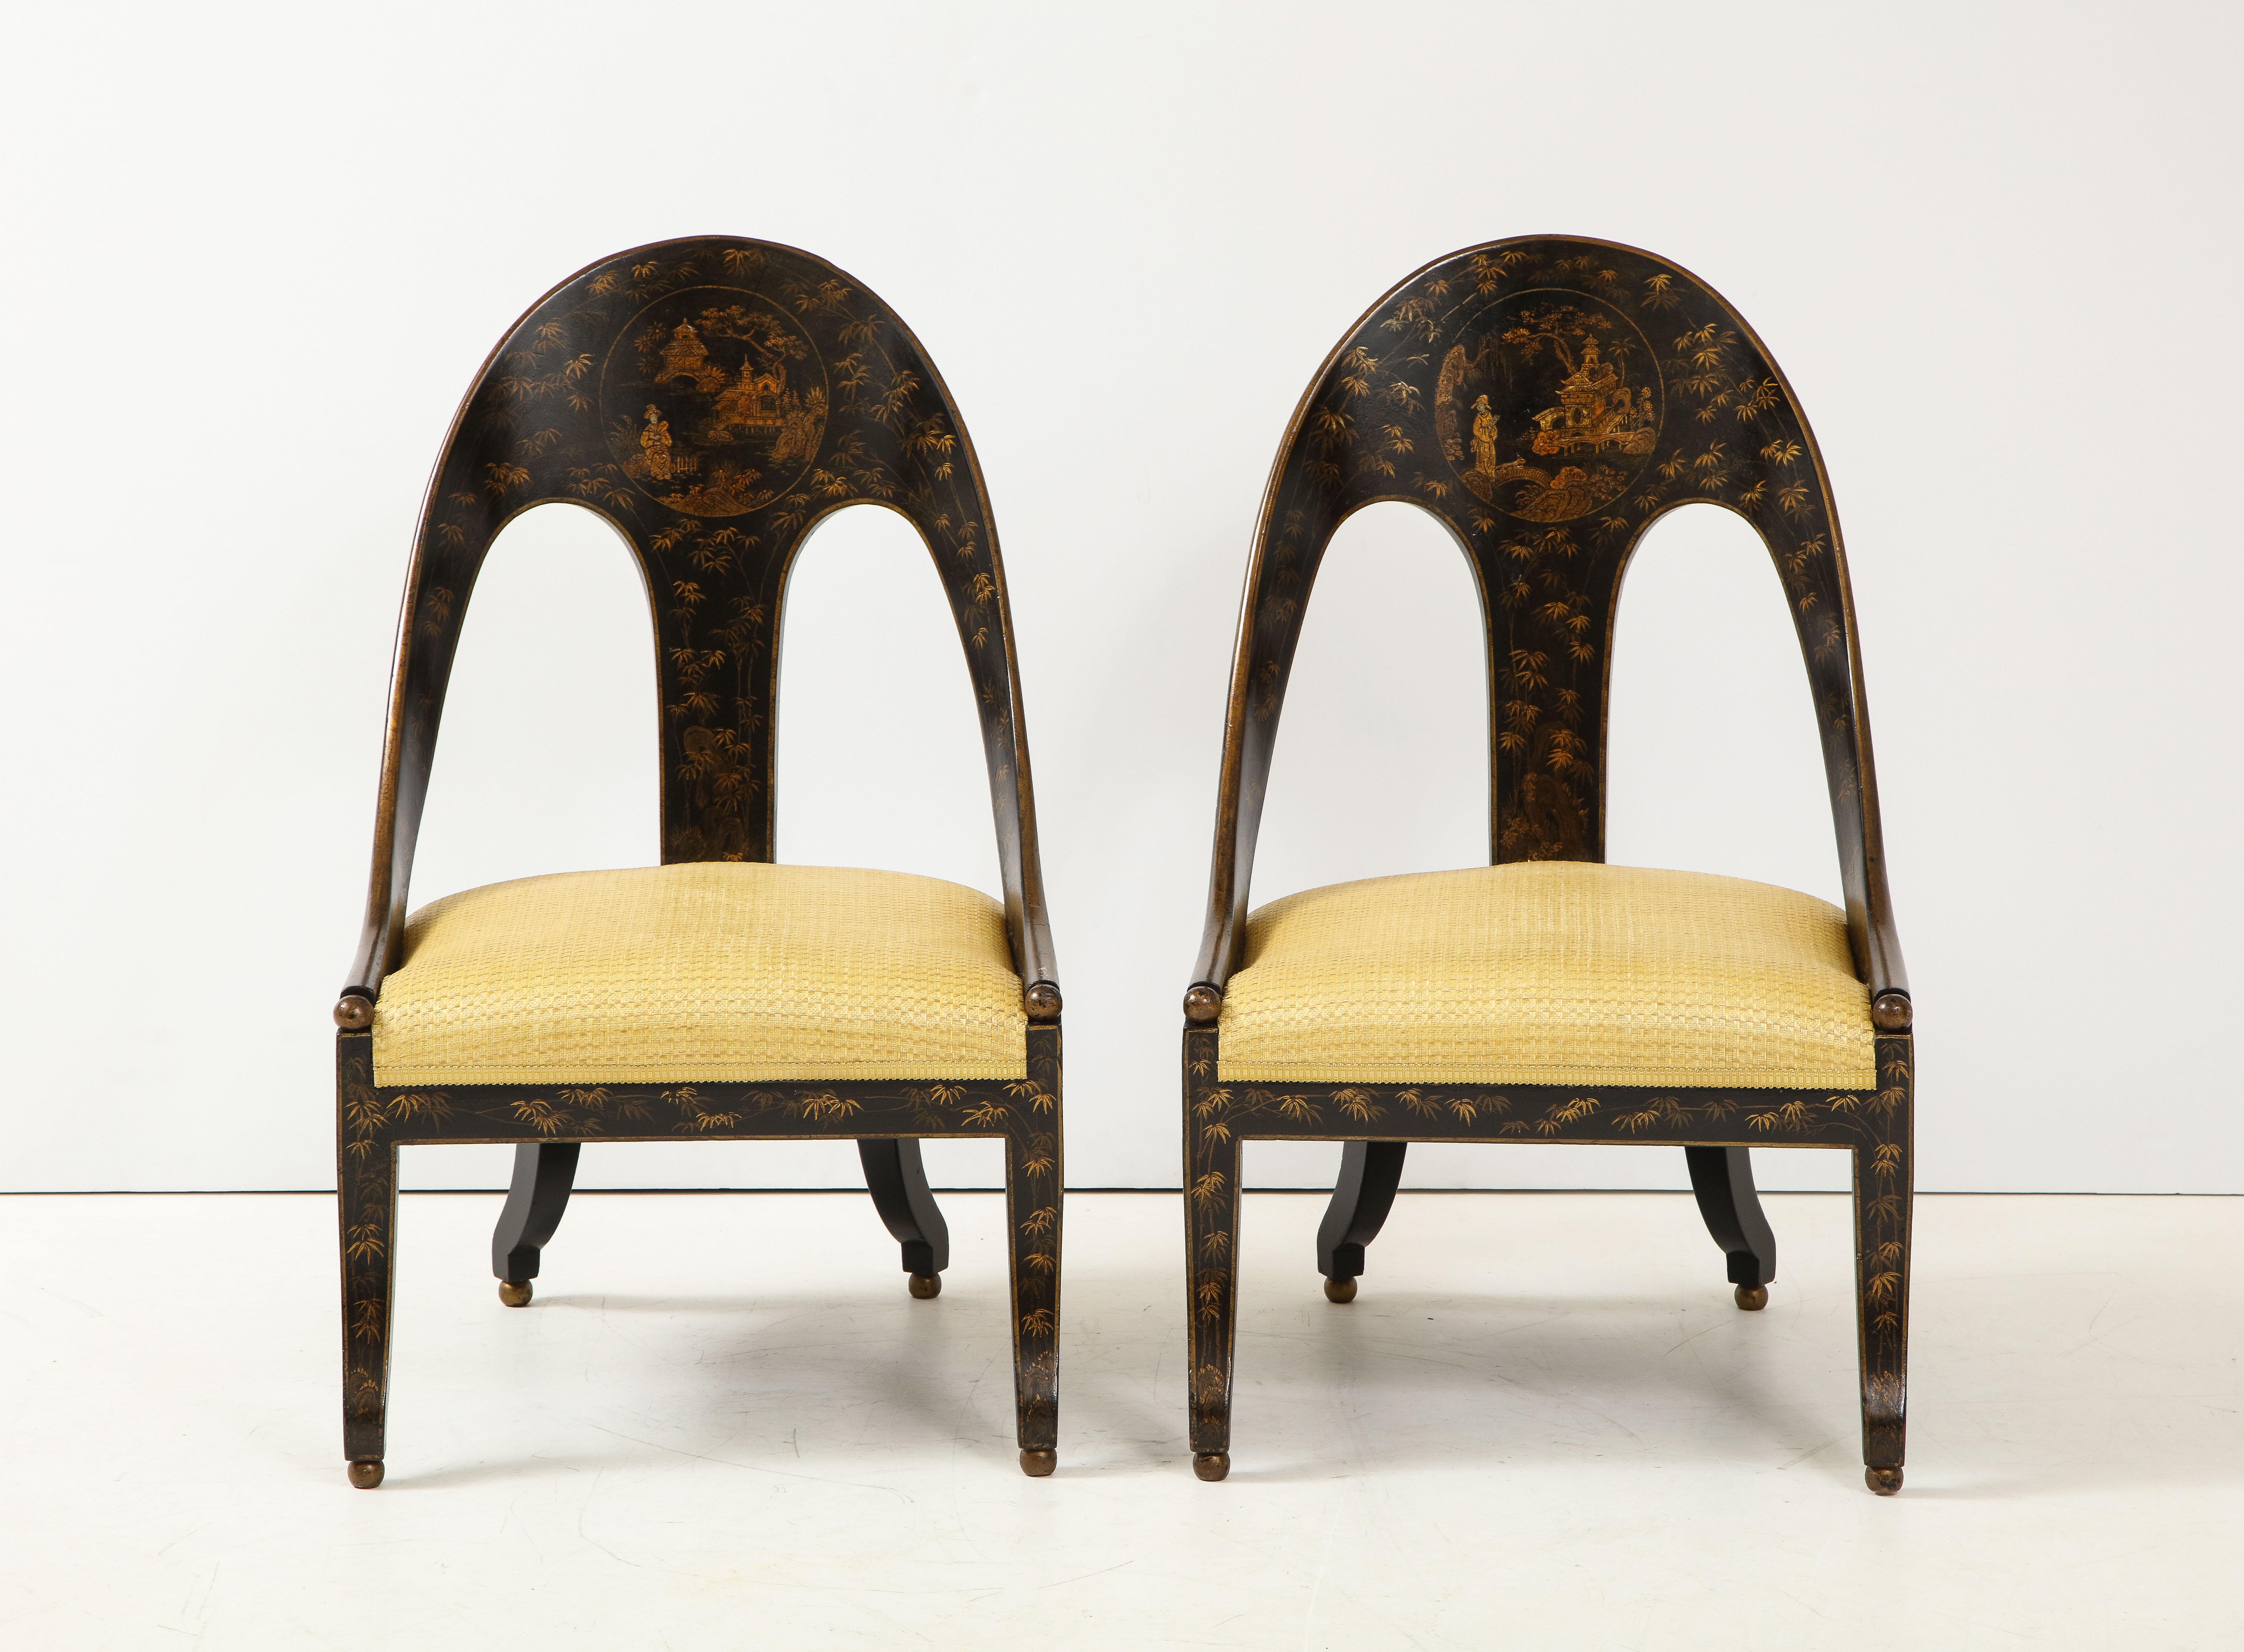 English Pair of Regency Style Spoon Chairs